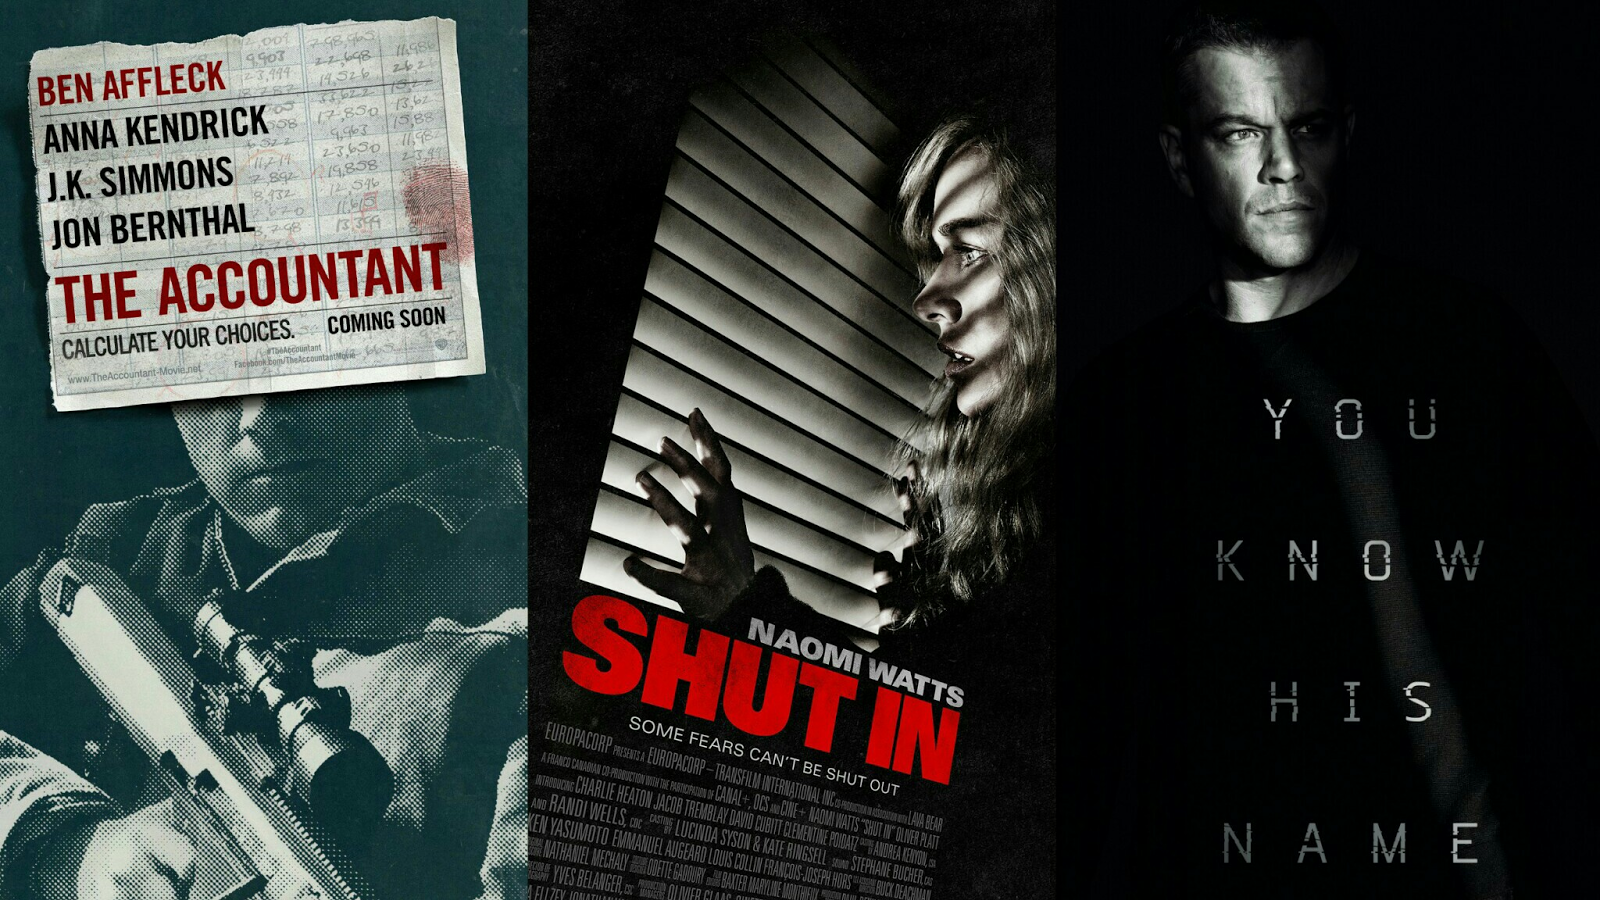 Eclectic Pop - Quick Hit Movie Reviews - The Accountant, Shut In, Jason Bourne